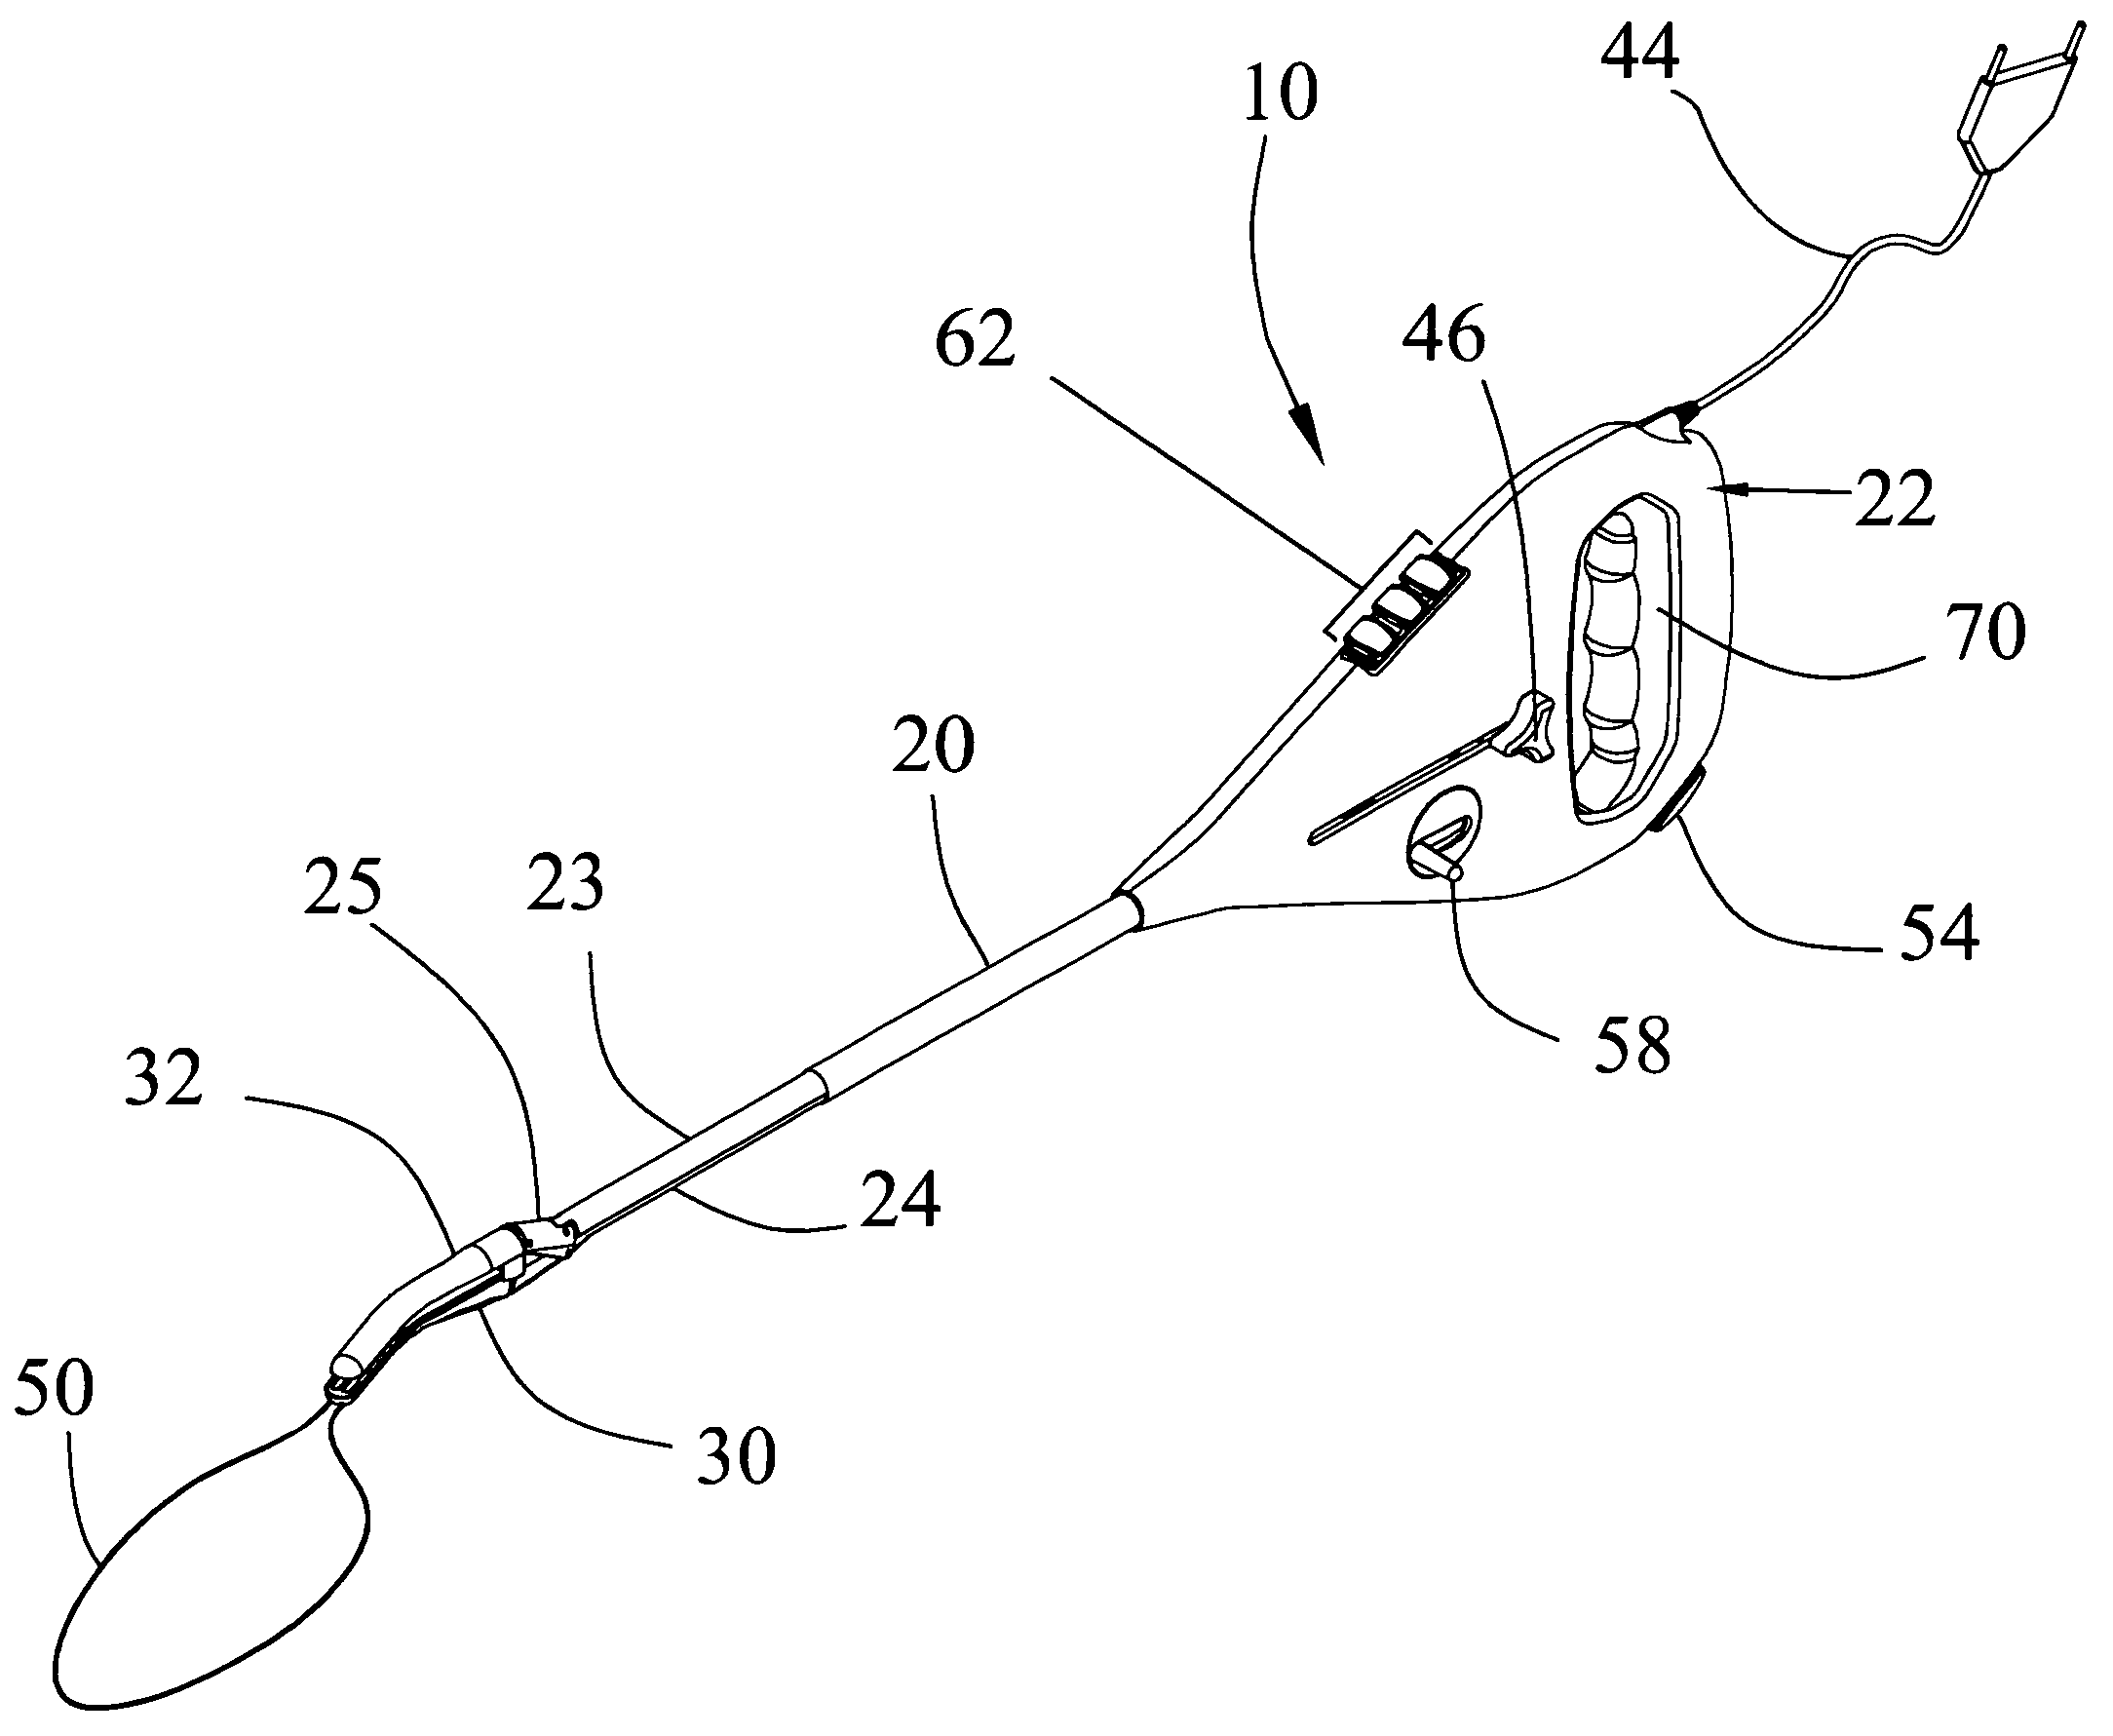 Resecting device